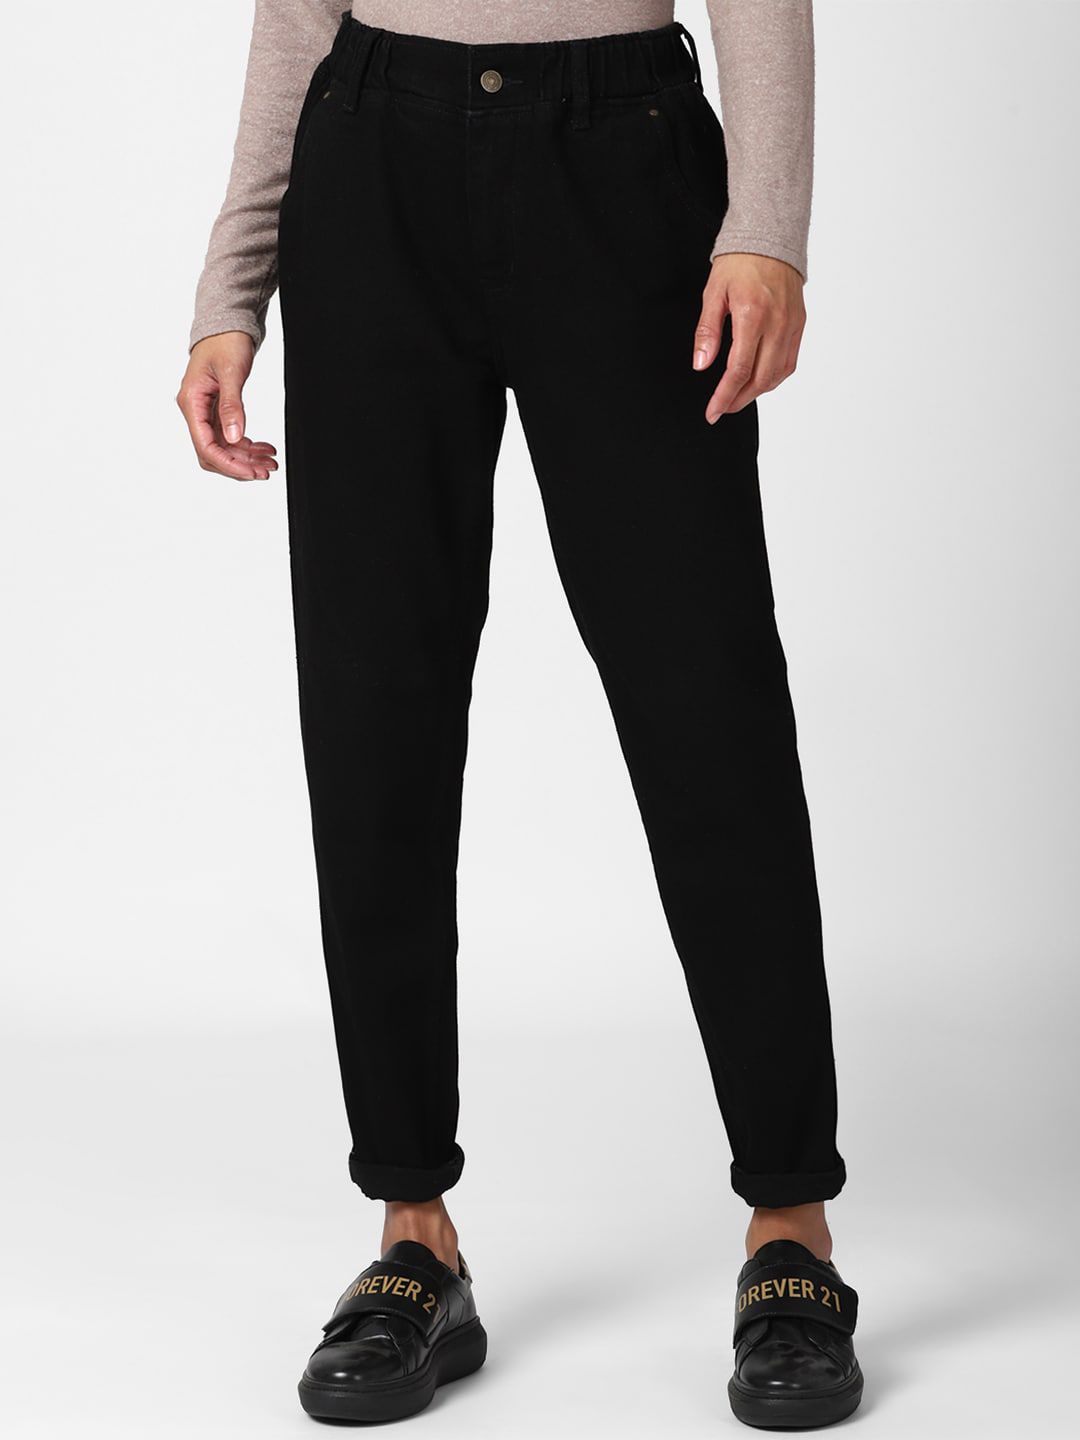 FOREVER 21 Women Black Jeans Price in India